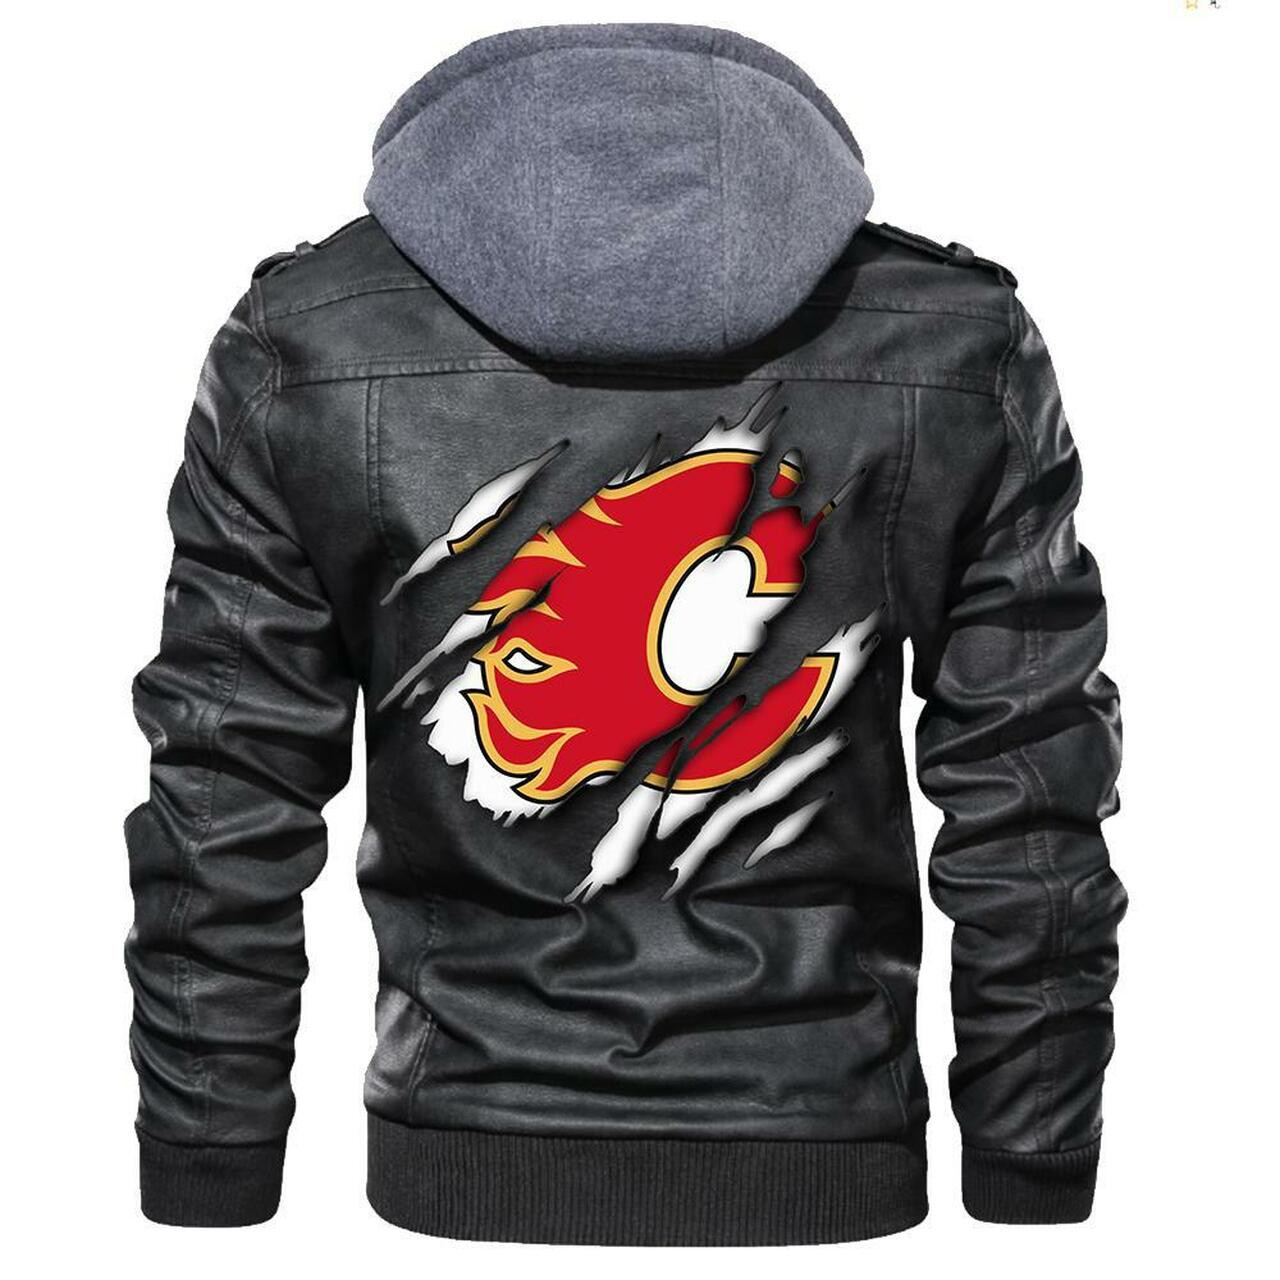 Check out and find the right leather jacket below 154